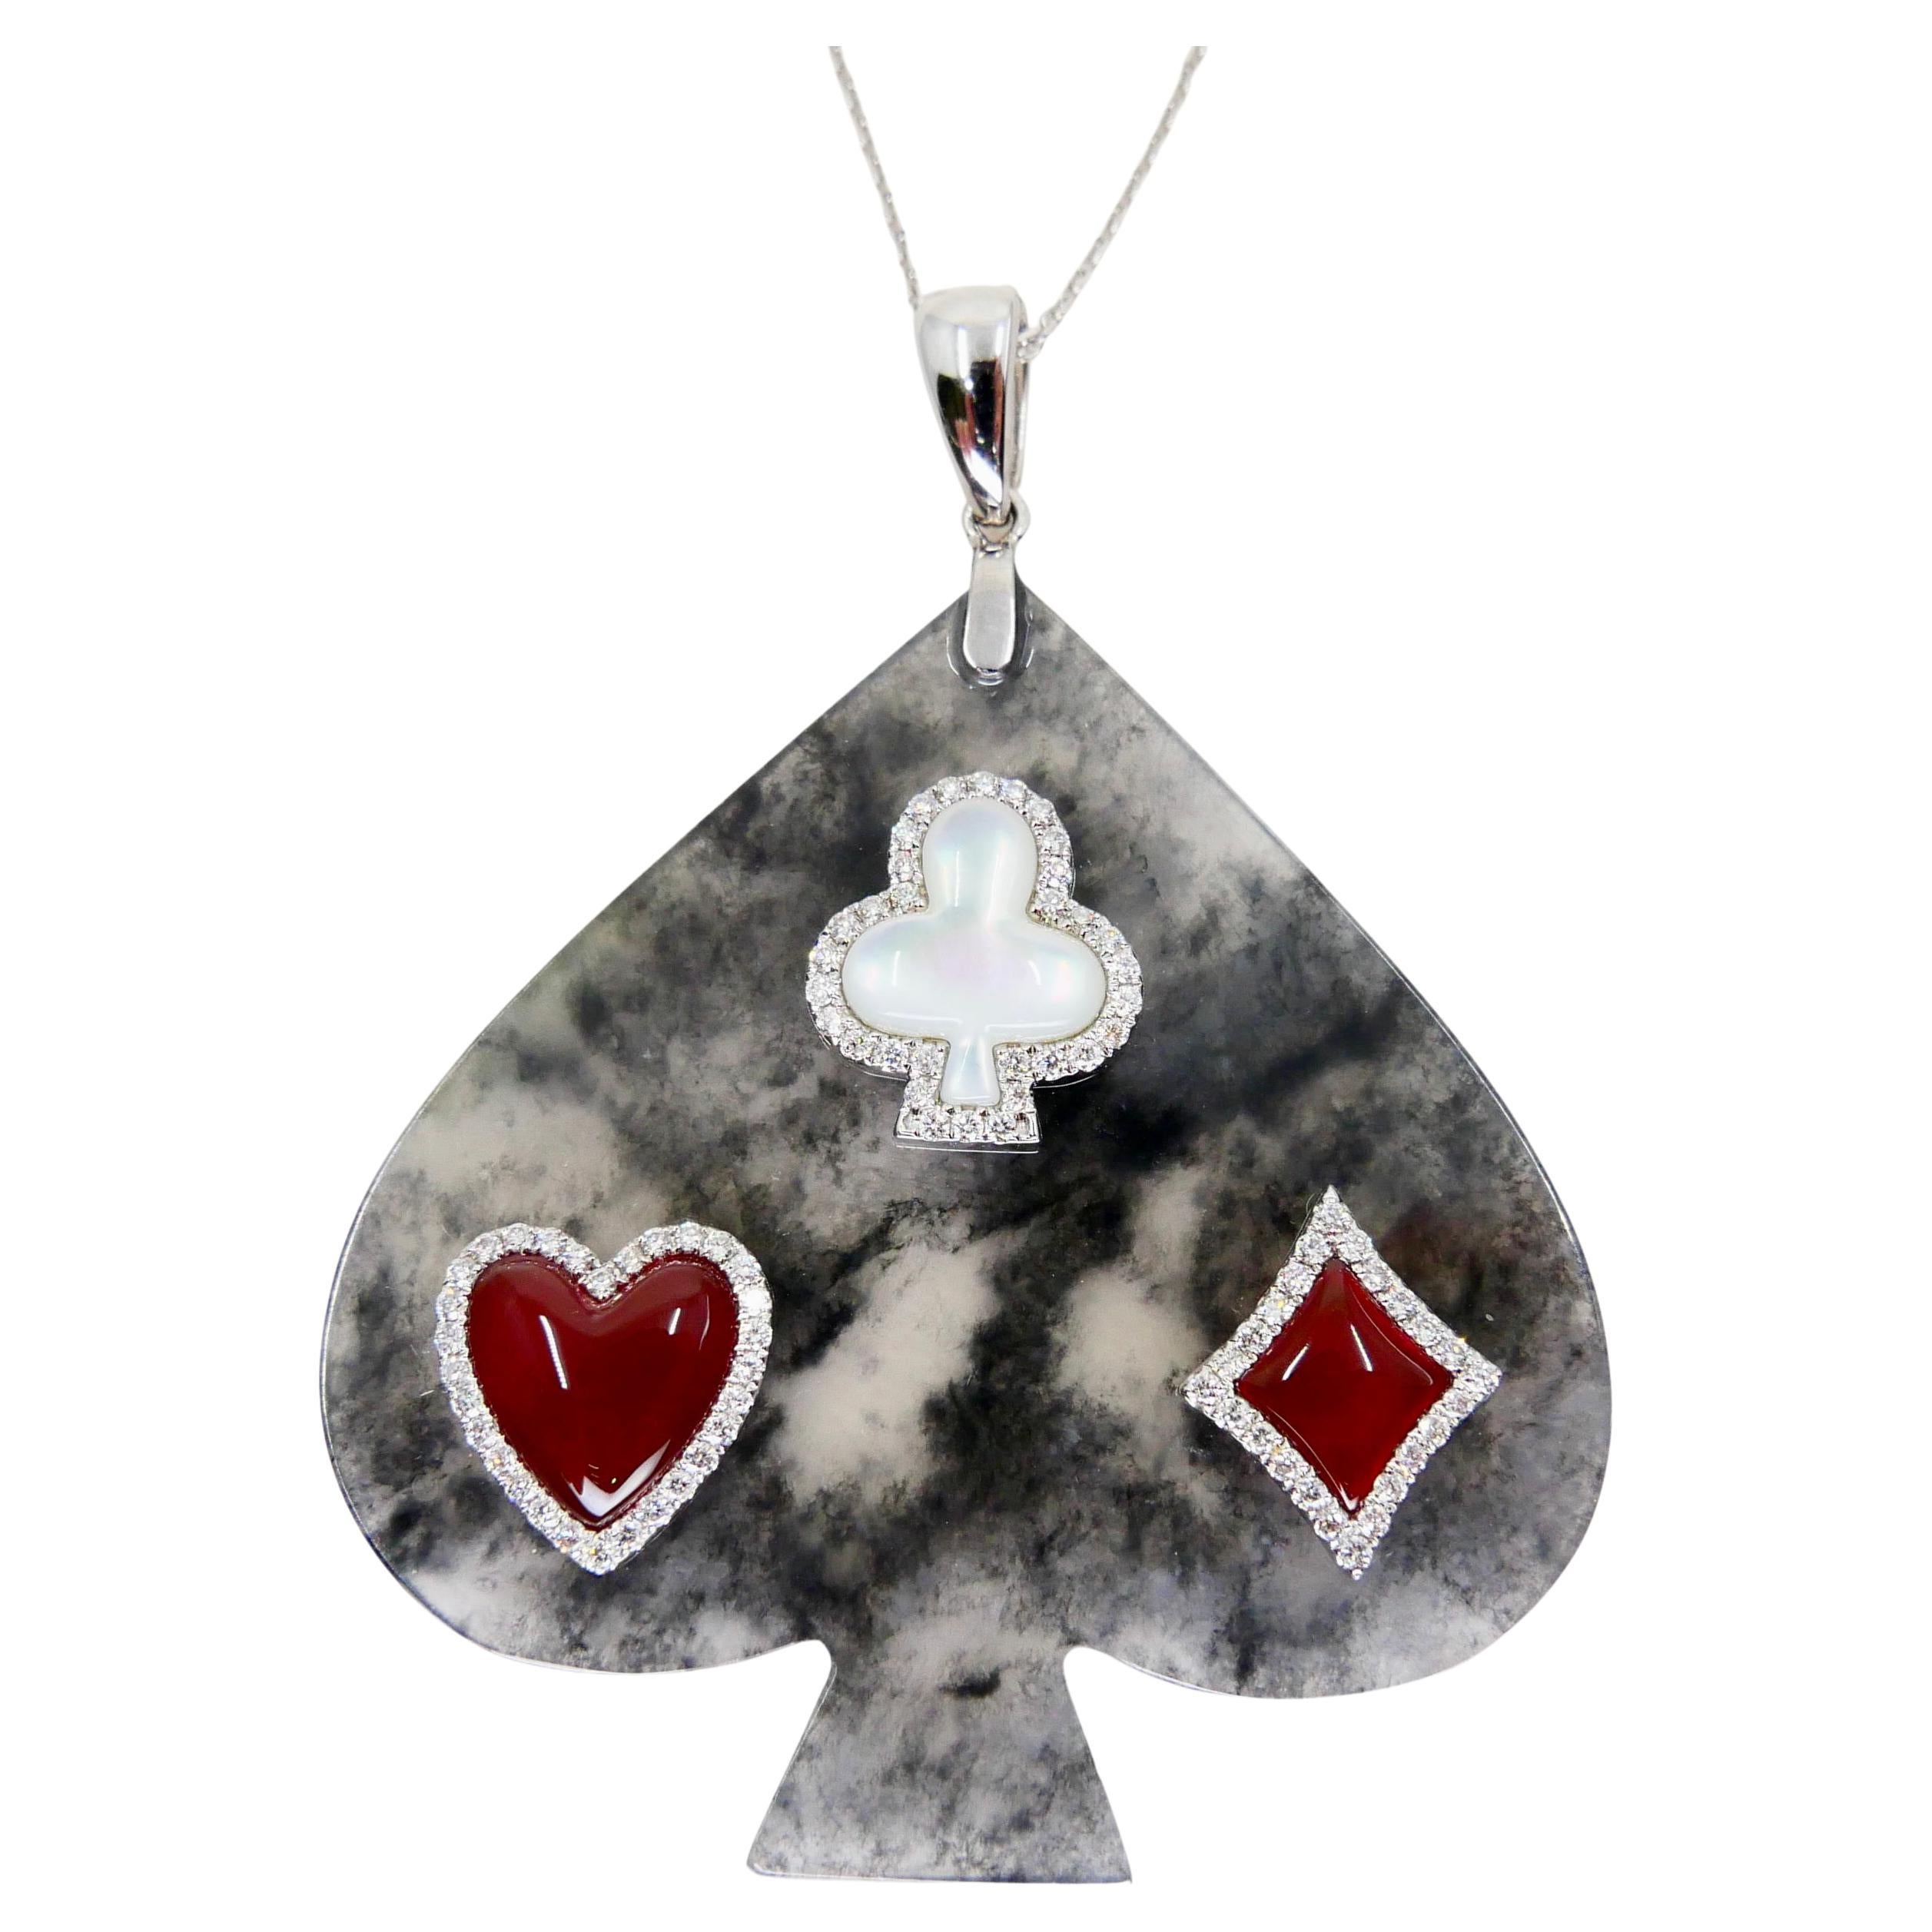 Certified Icy Black Jade, Diamond, Red Agate & MOP Pendant Necklace, Card Suits For Sale